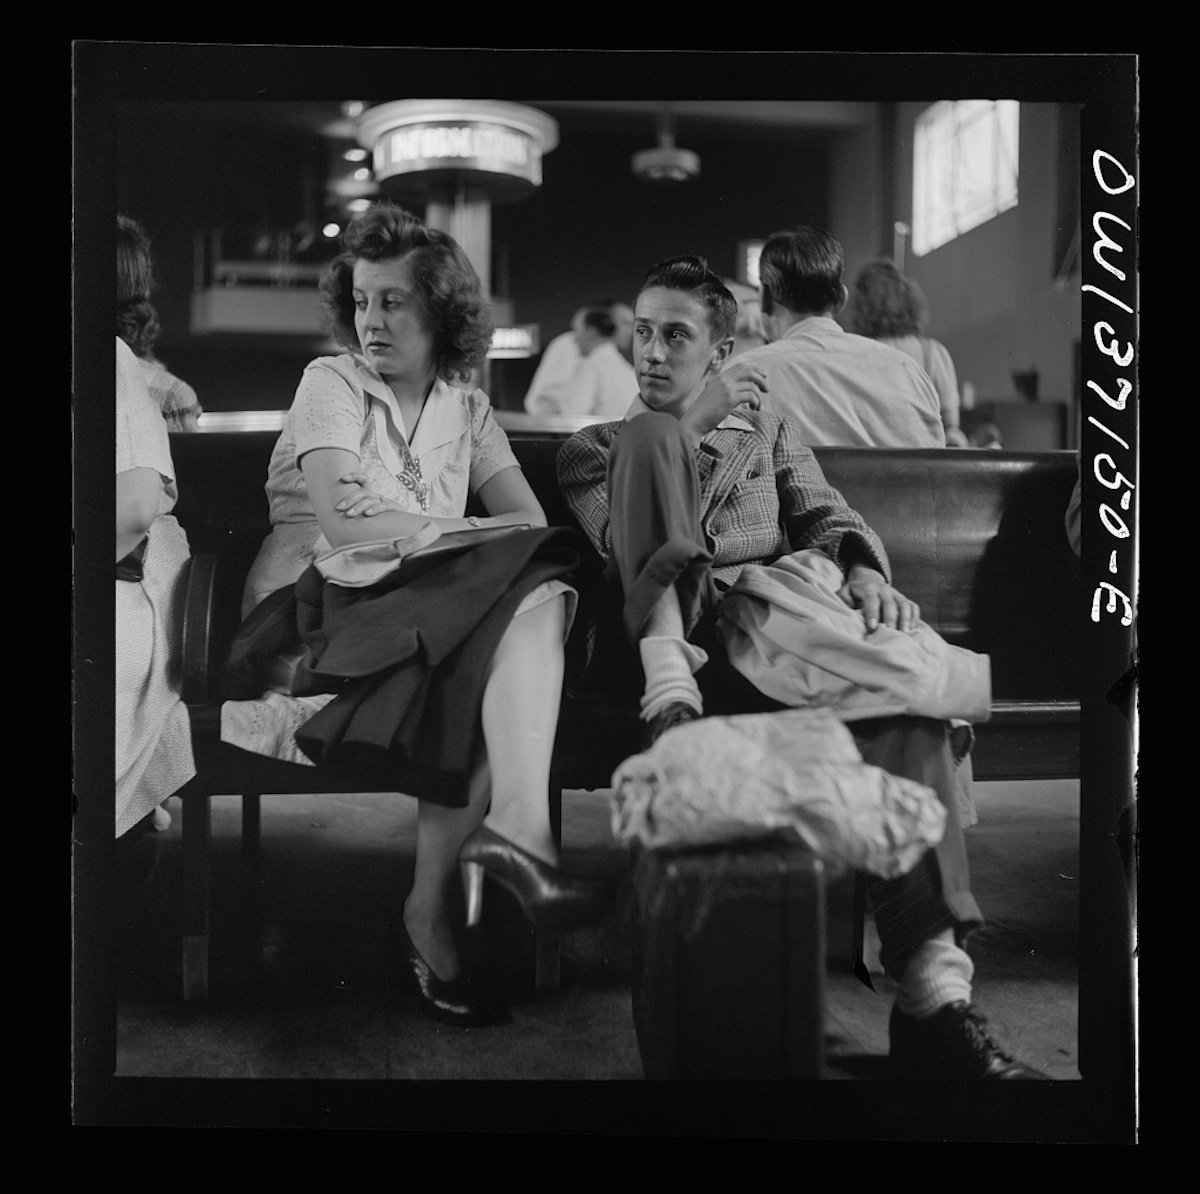 Pittsburgh, Pennsylvania. Passengers in the waiting room of the Greyhound bus station